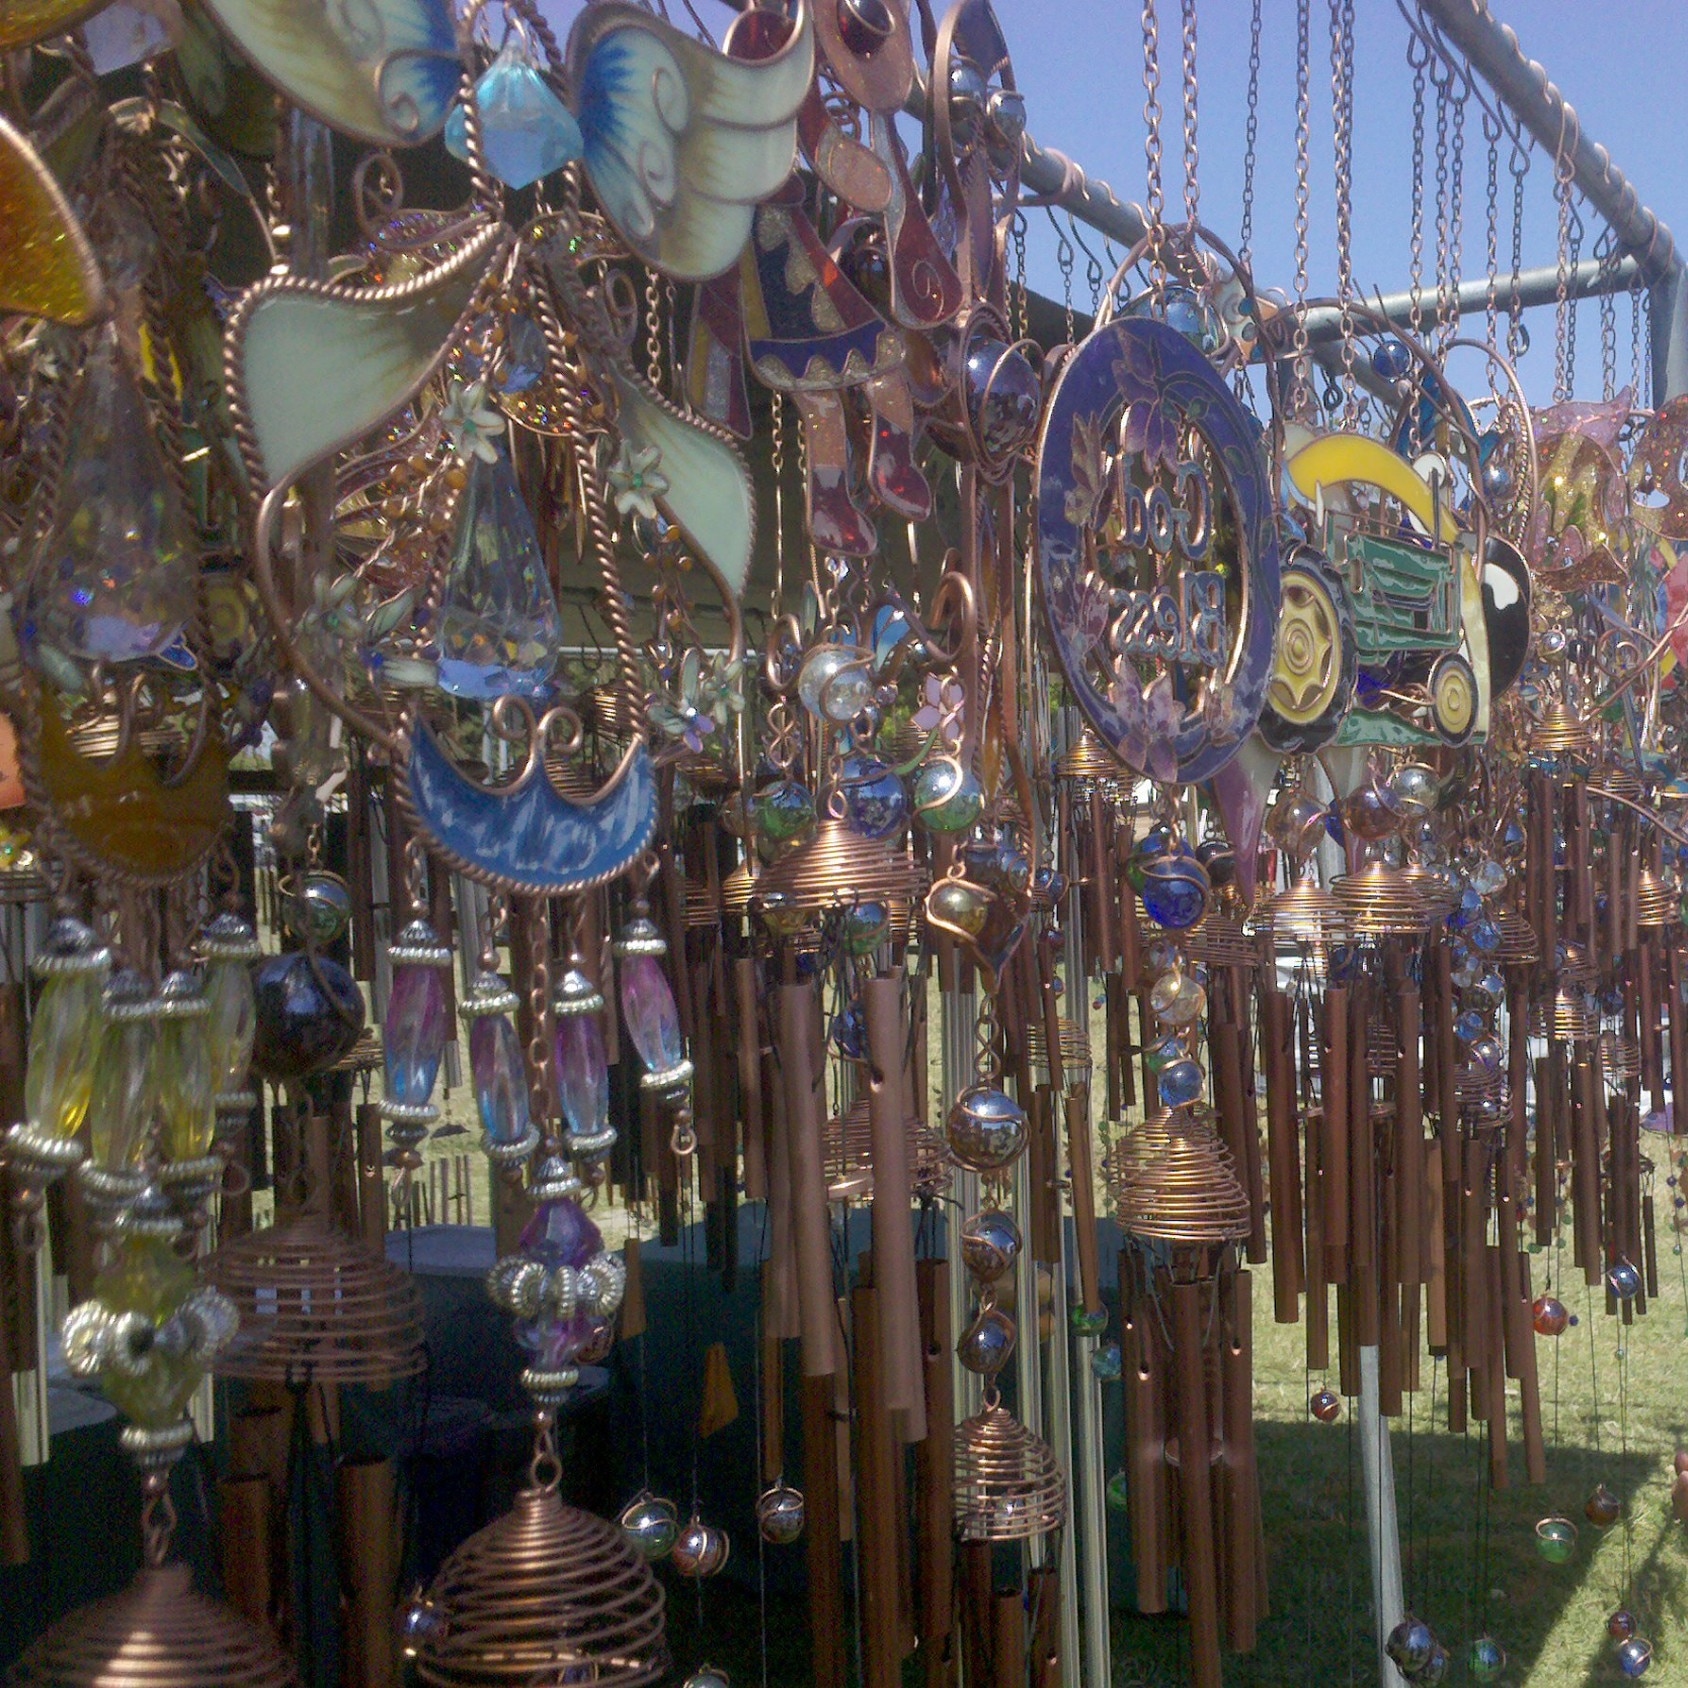 Wind Chime festival in Lompoc, CA. It was a musical, beautiful day! #Festival